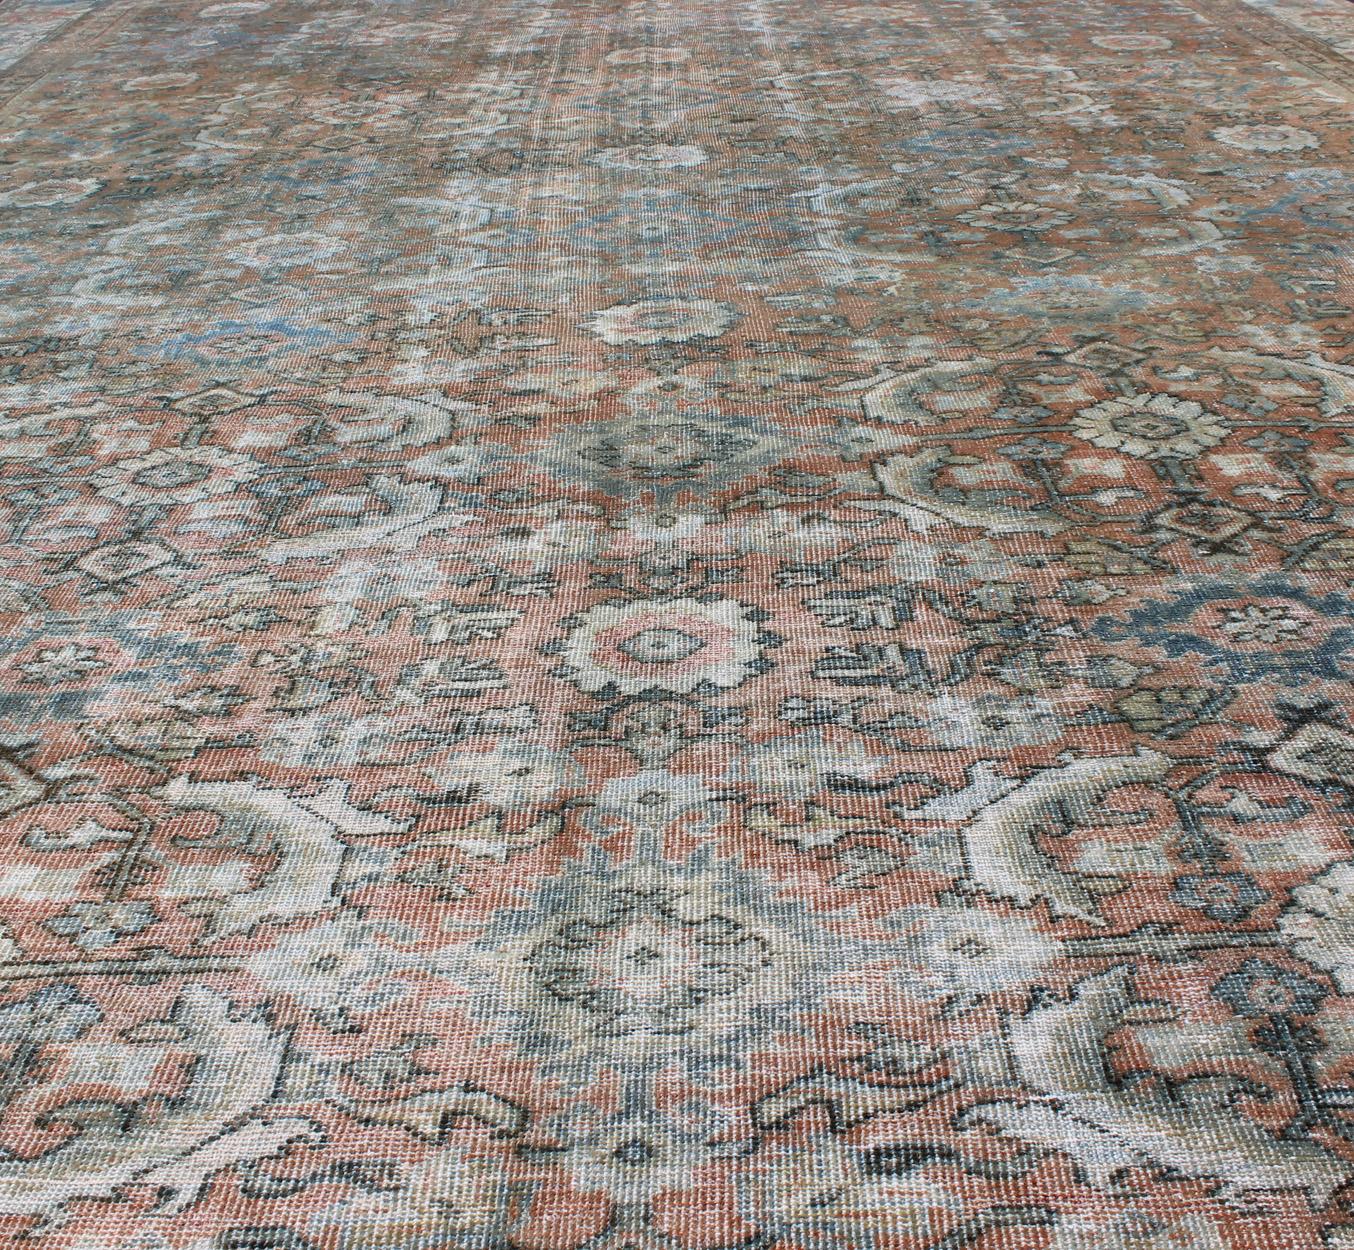 Wool Distressed Antique Large Sultanabad Rug in Faded Red Background, Blue, Green